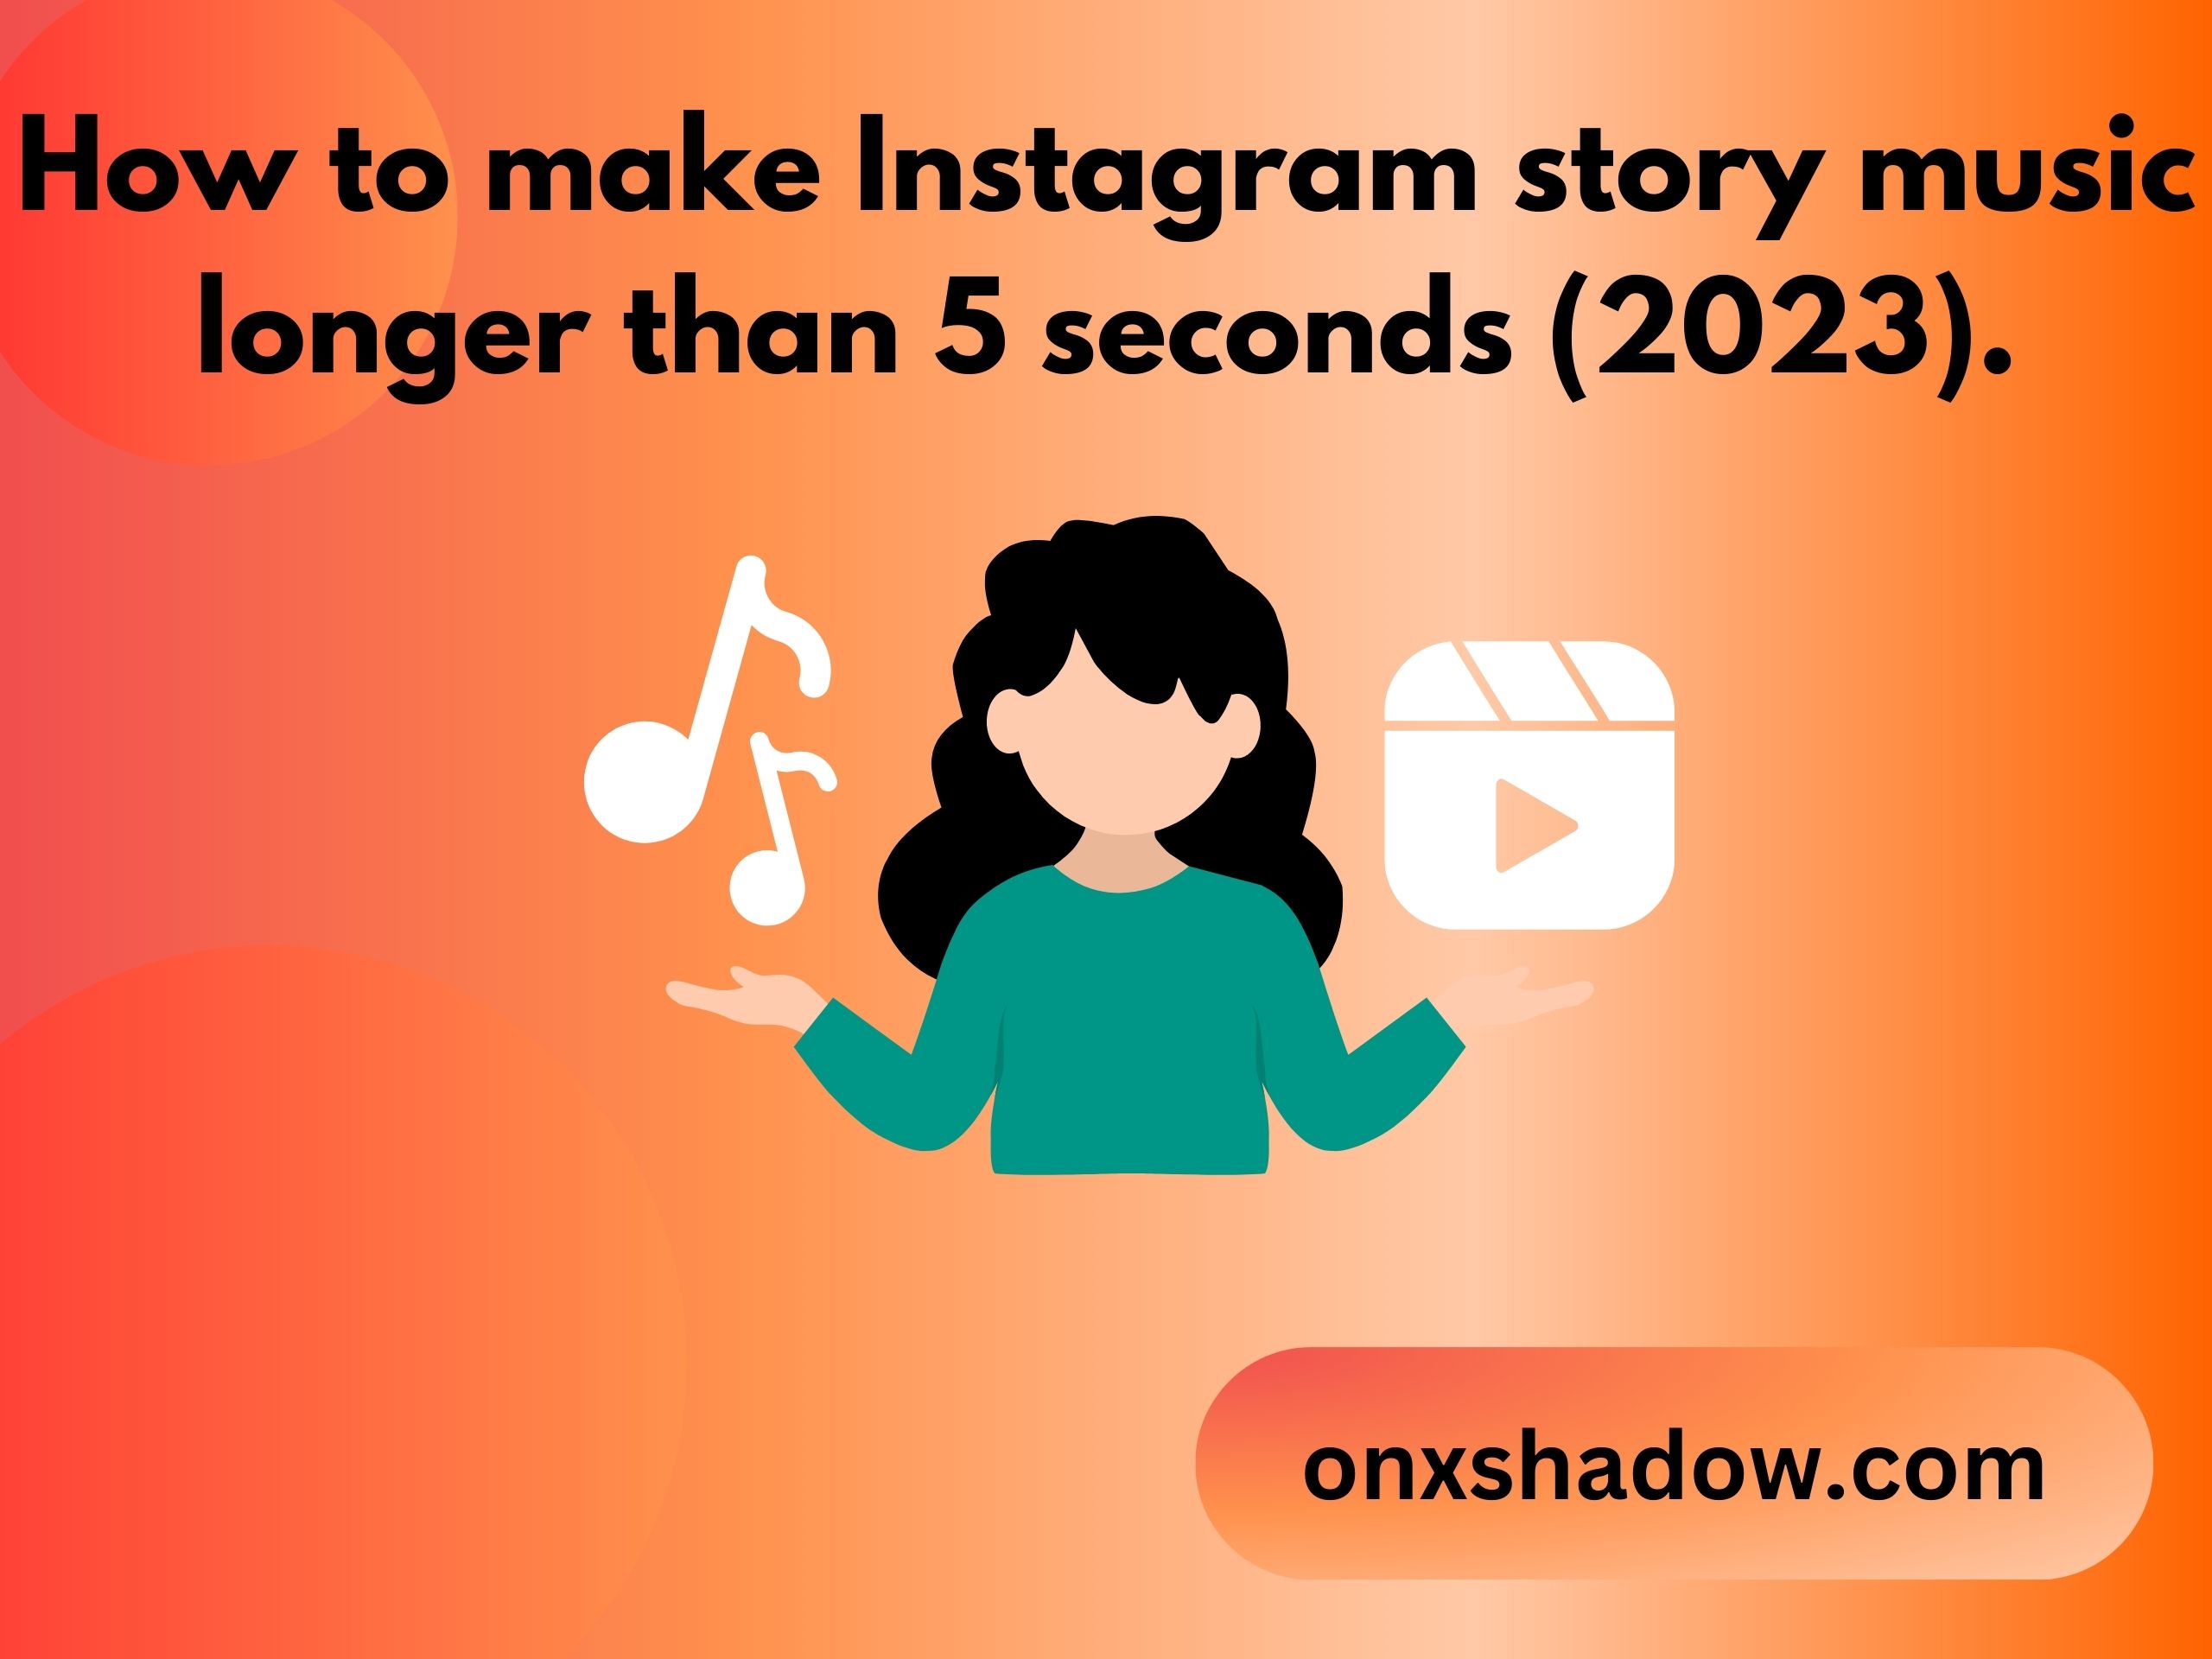 How to make Instagram story music longer than 5 seconds (2023).